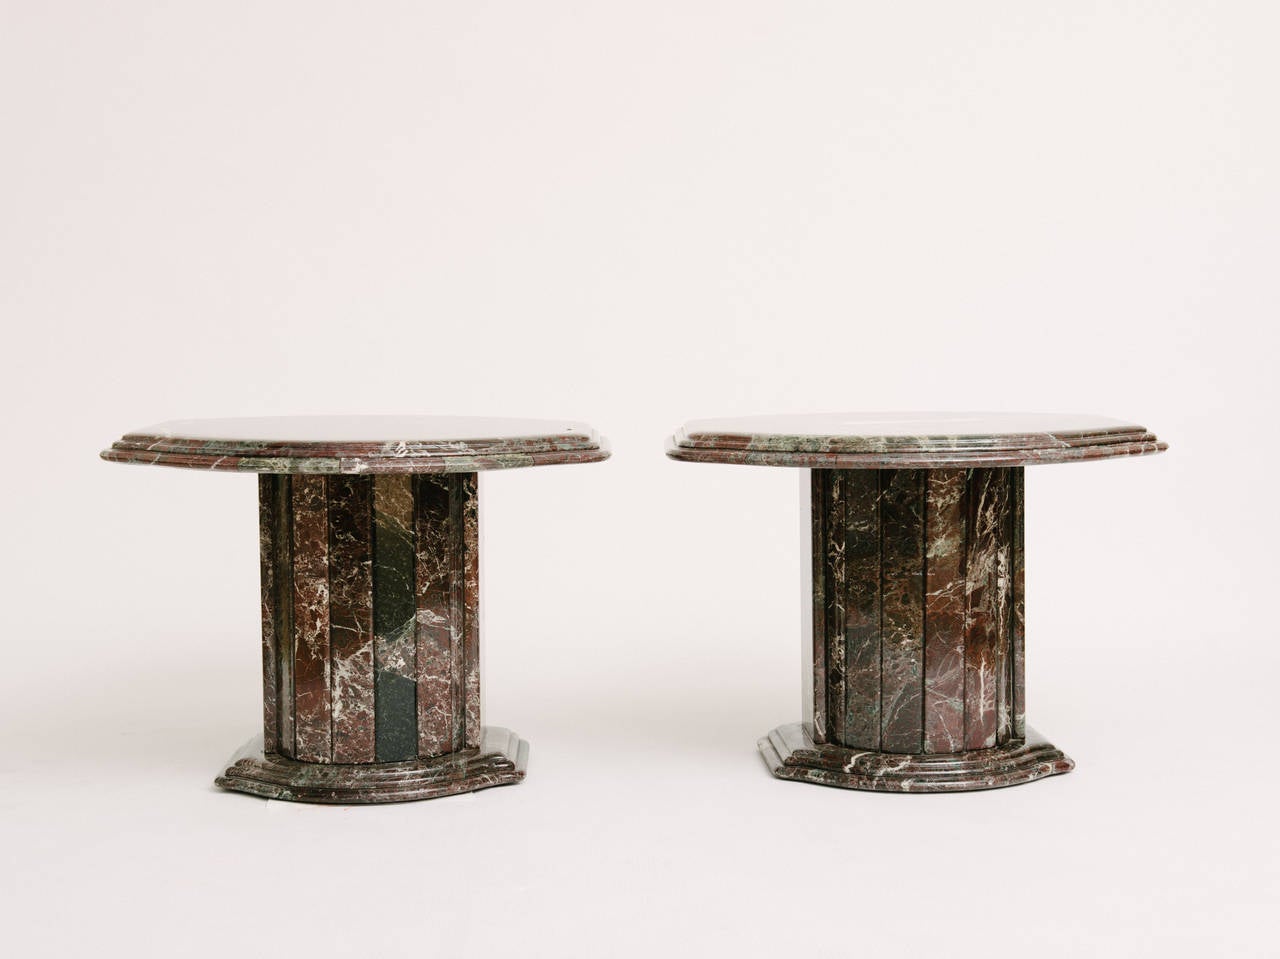 Pair of Italian Verde antico marble oval side tables.